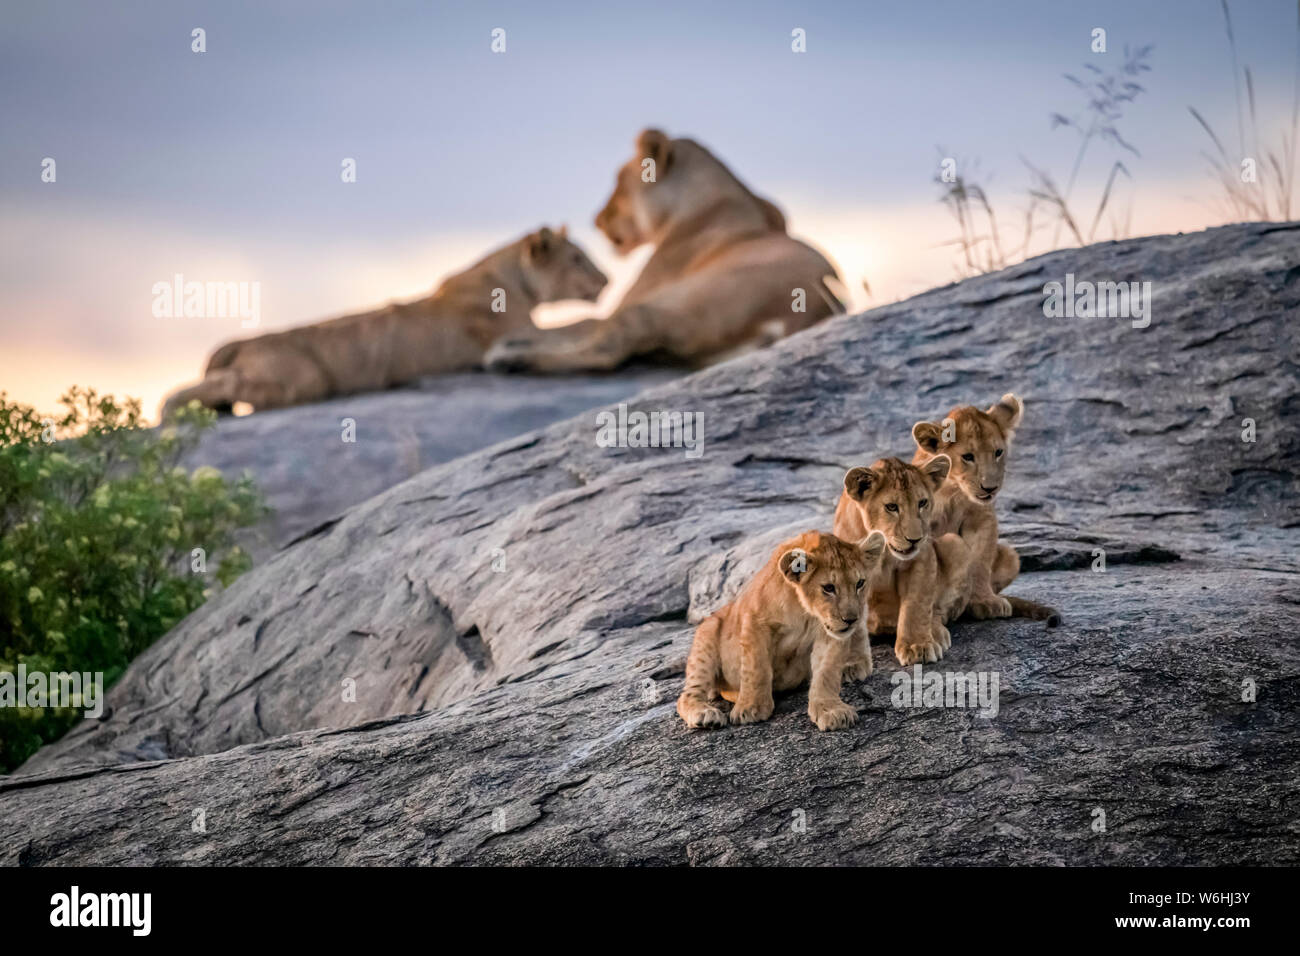 Three lion cubs (Panthera leo) sitting on a rock looking out with two lionesses in the background at dusk, Serengeti; Tanzania Stock Photo